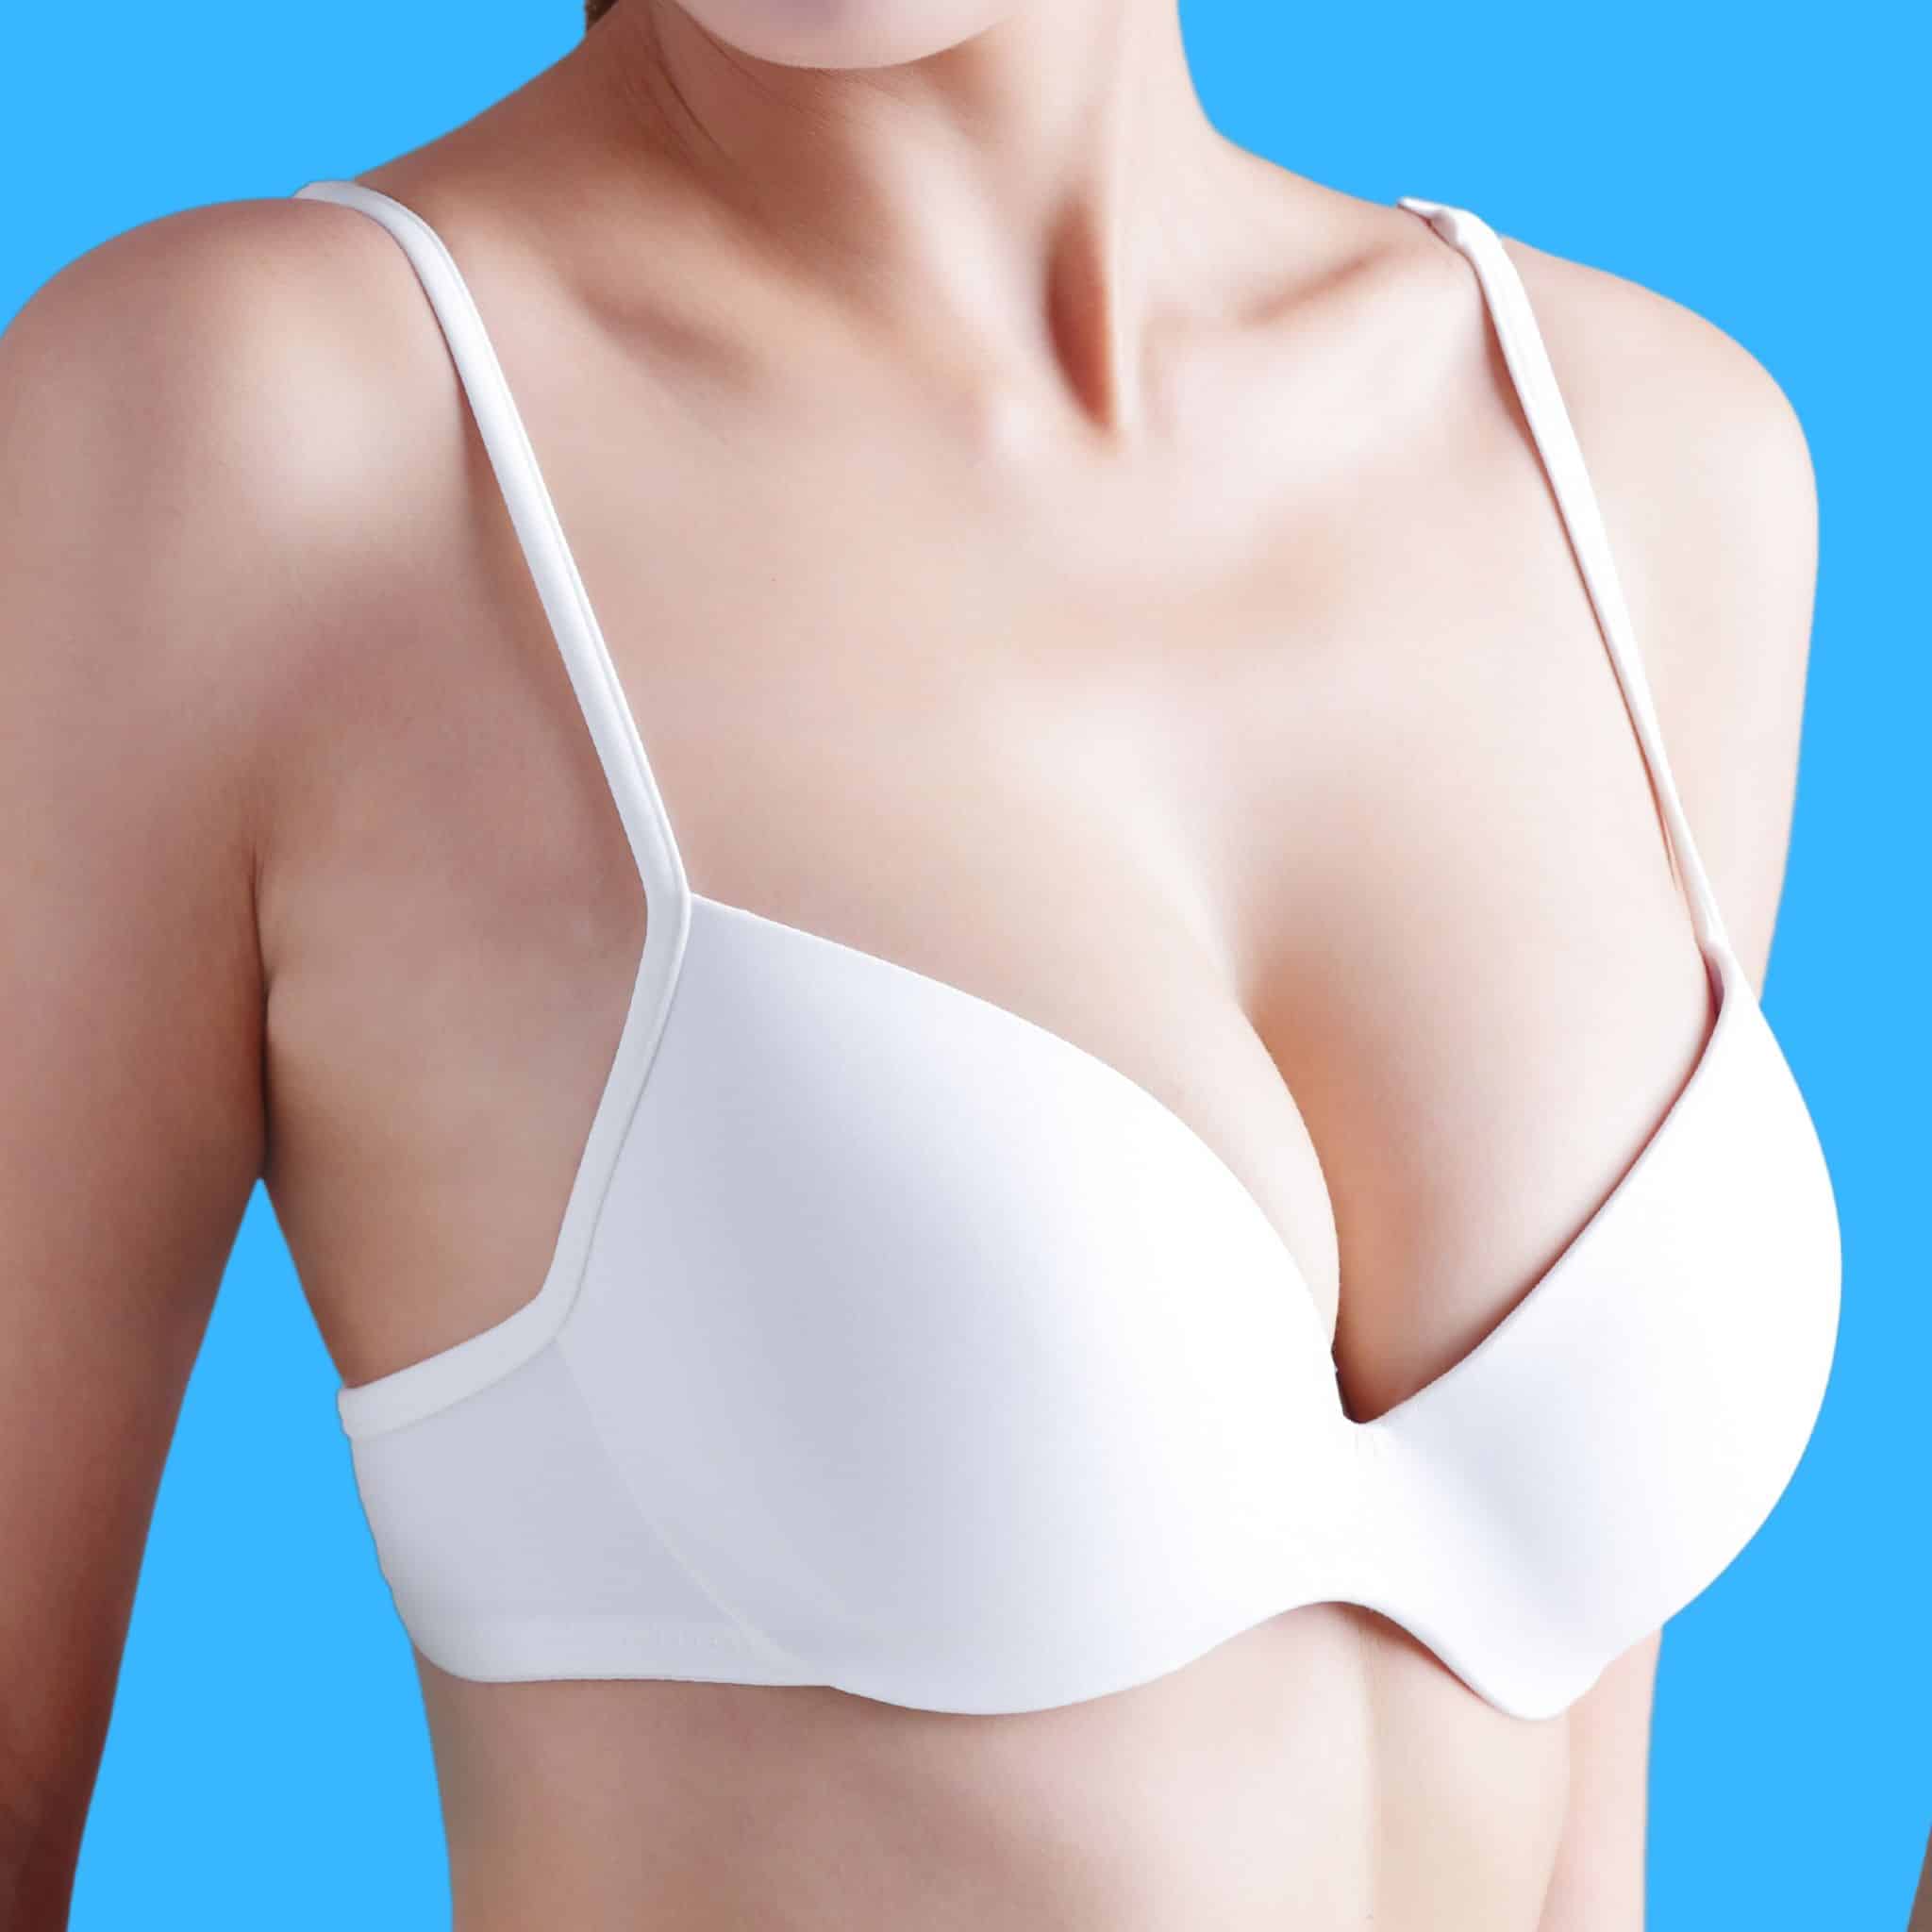 An image of a woman with bigger boobs after using our breast augmentation products.